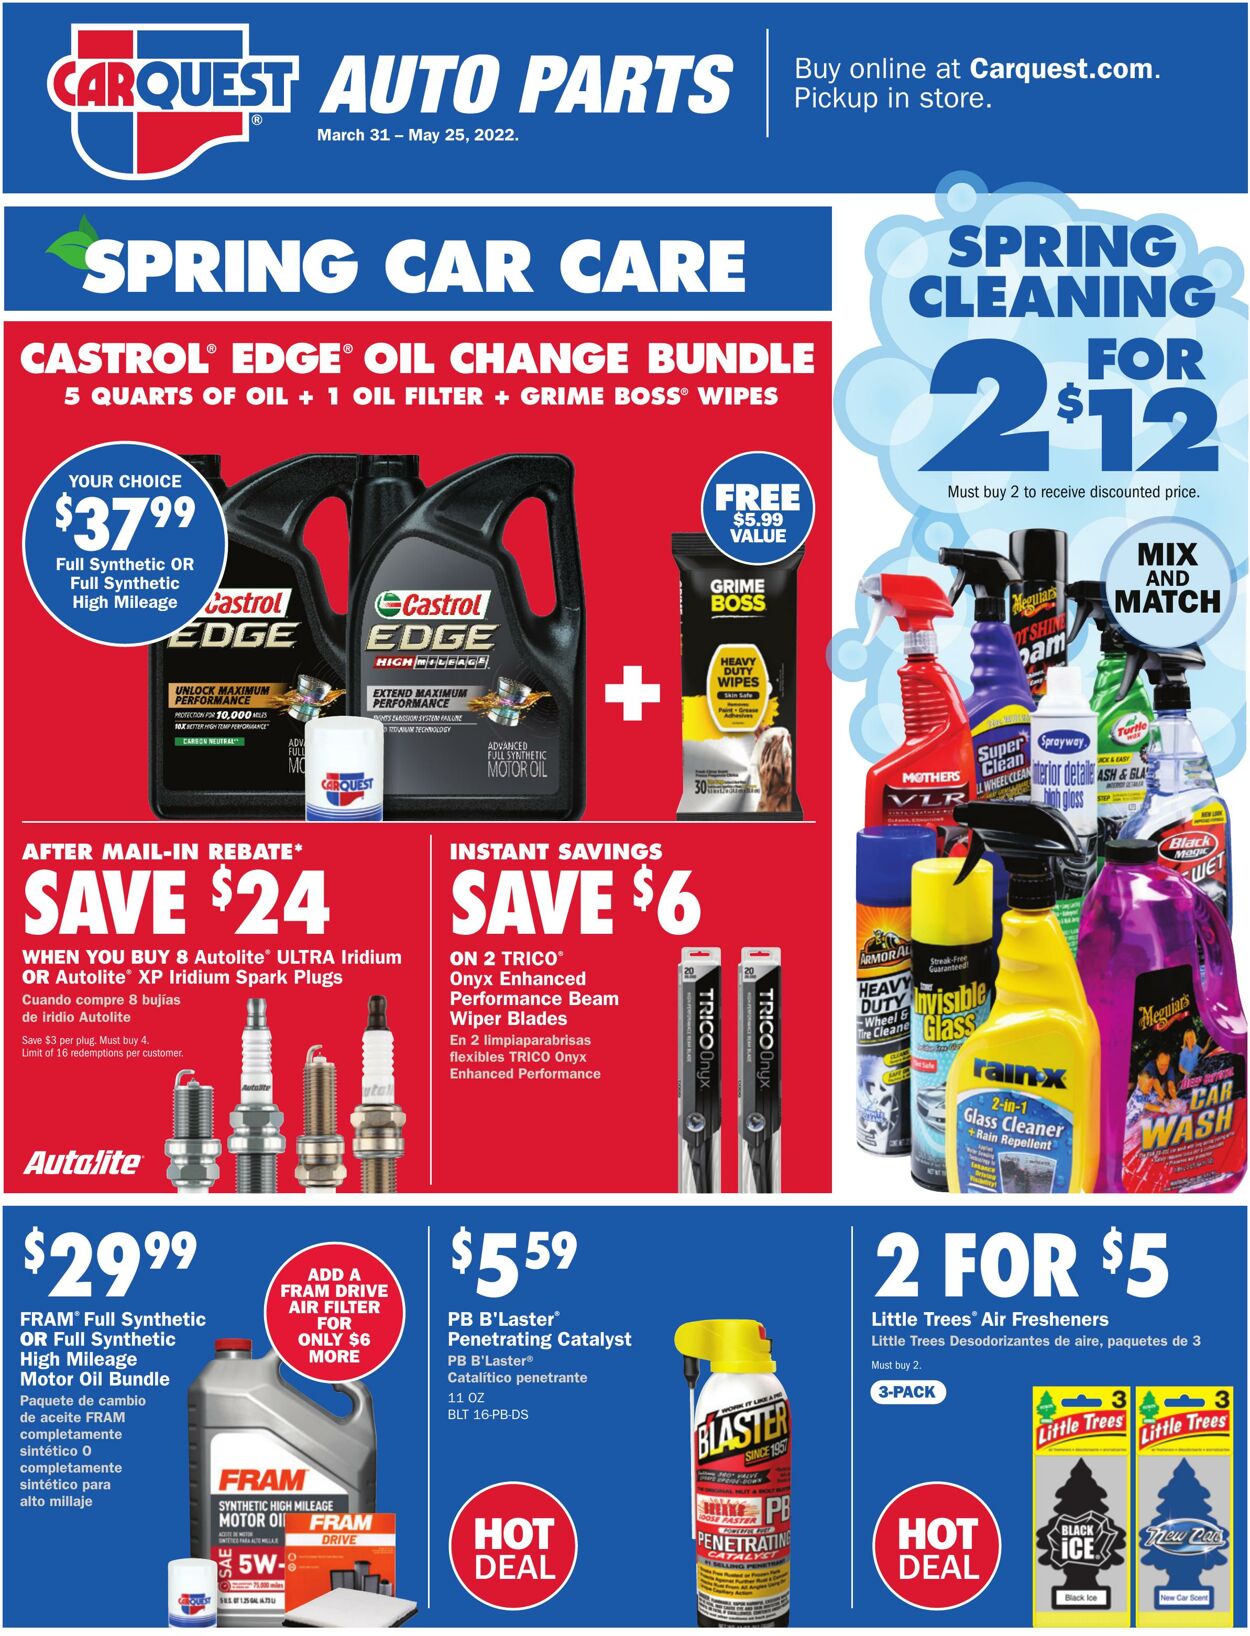 Car Quest Promotional weekly ads